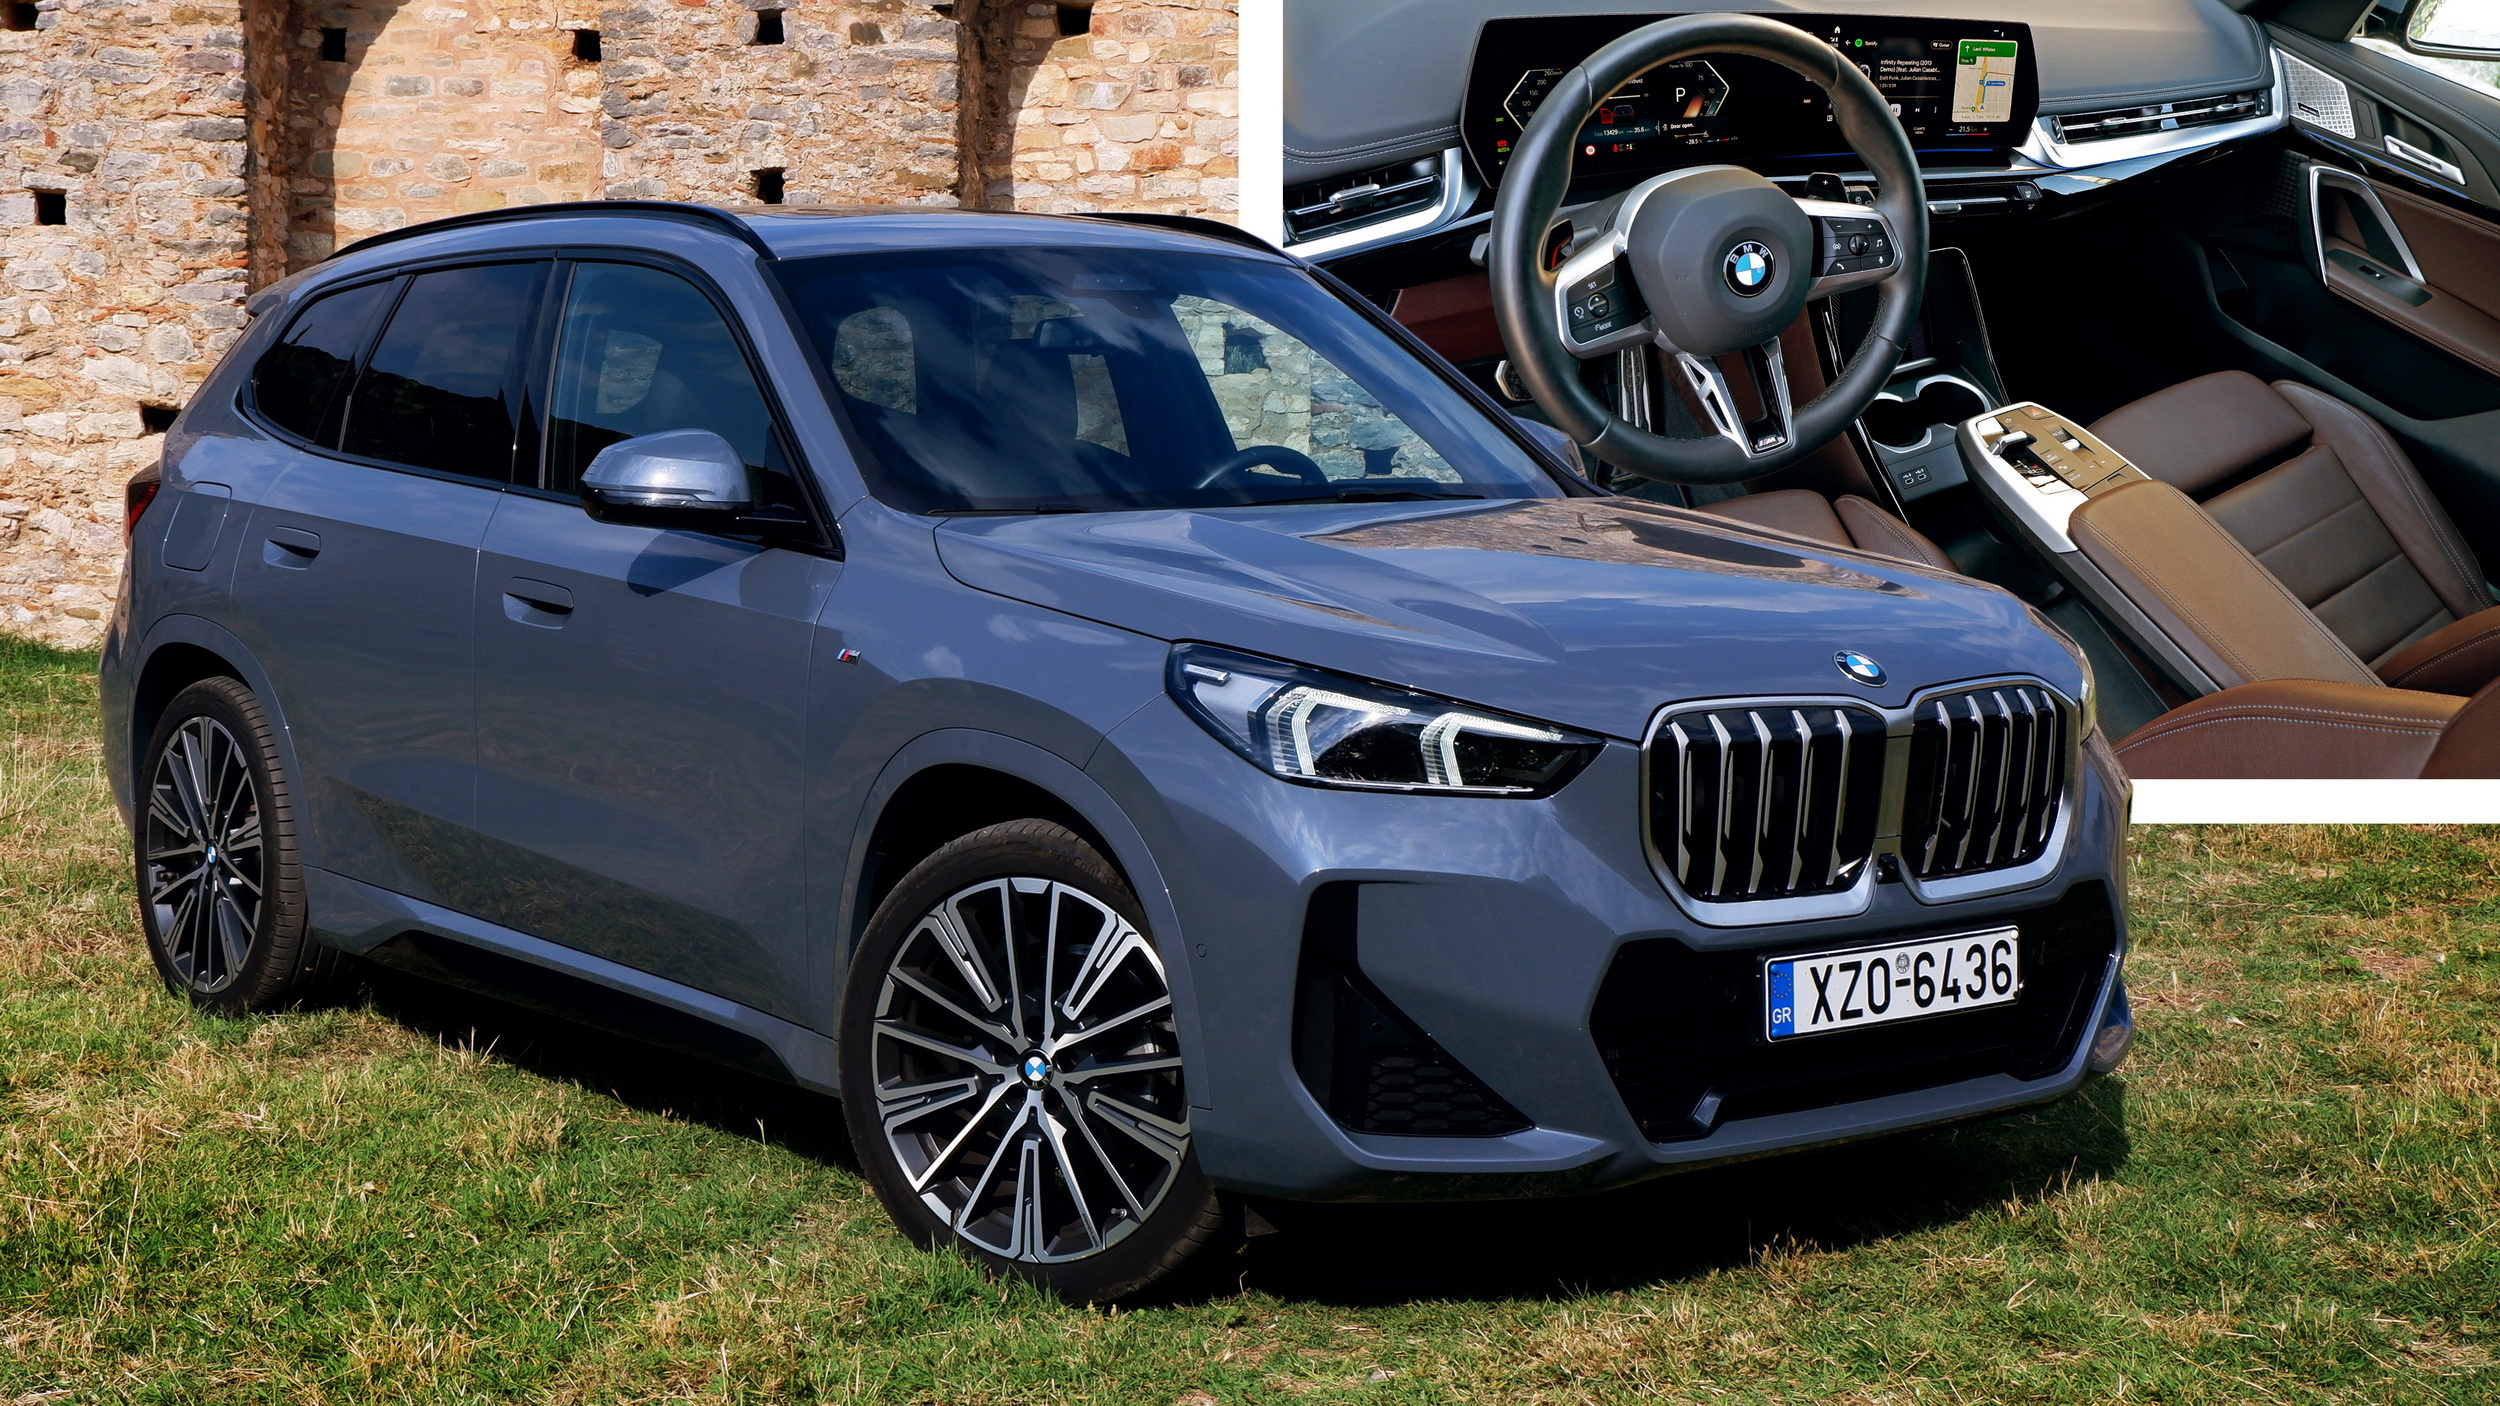 We’re Driving The EU-Spec 3-Cylinder BMW X1, What Would You Like To Know? Auto Recent